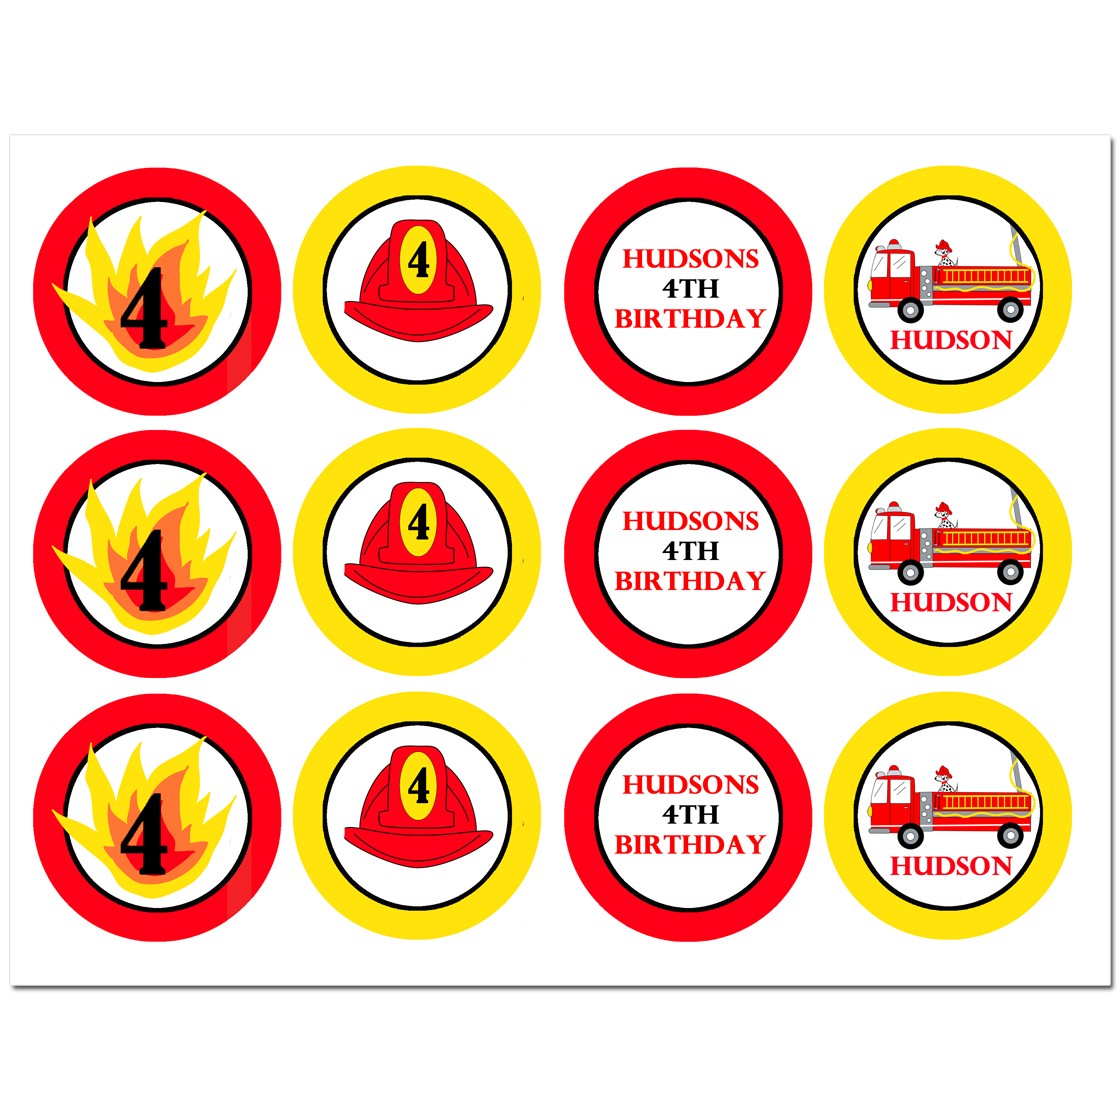 Firetruck Cupcake Toppers By That Party Chick Firefighter